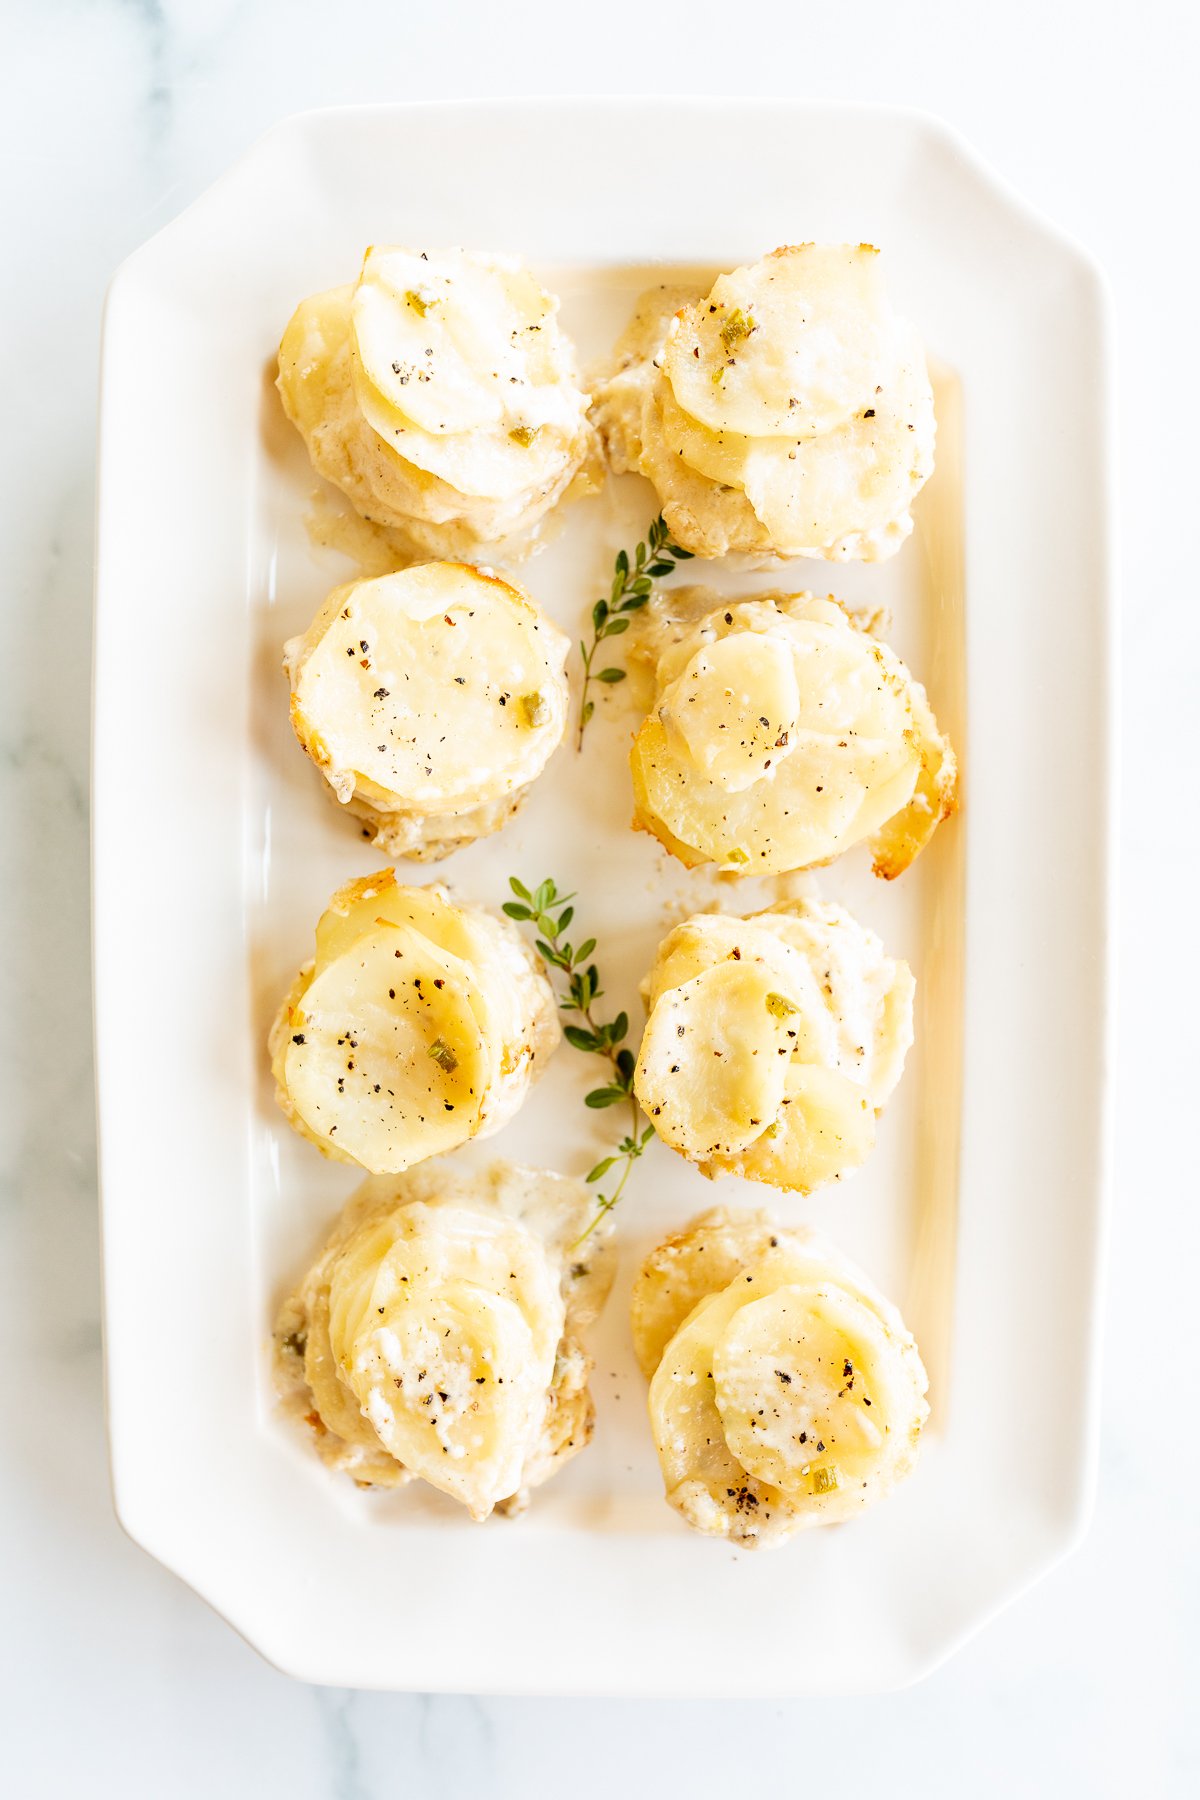 Tasty potato side dishes on a white plate with sprigs of thyme.